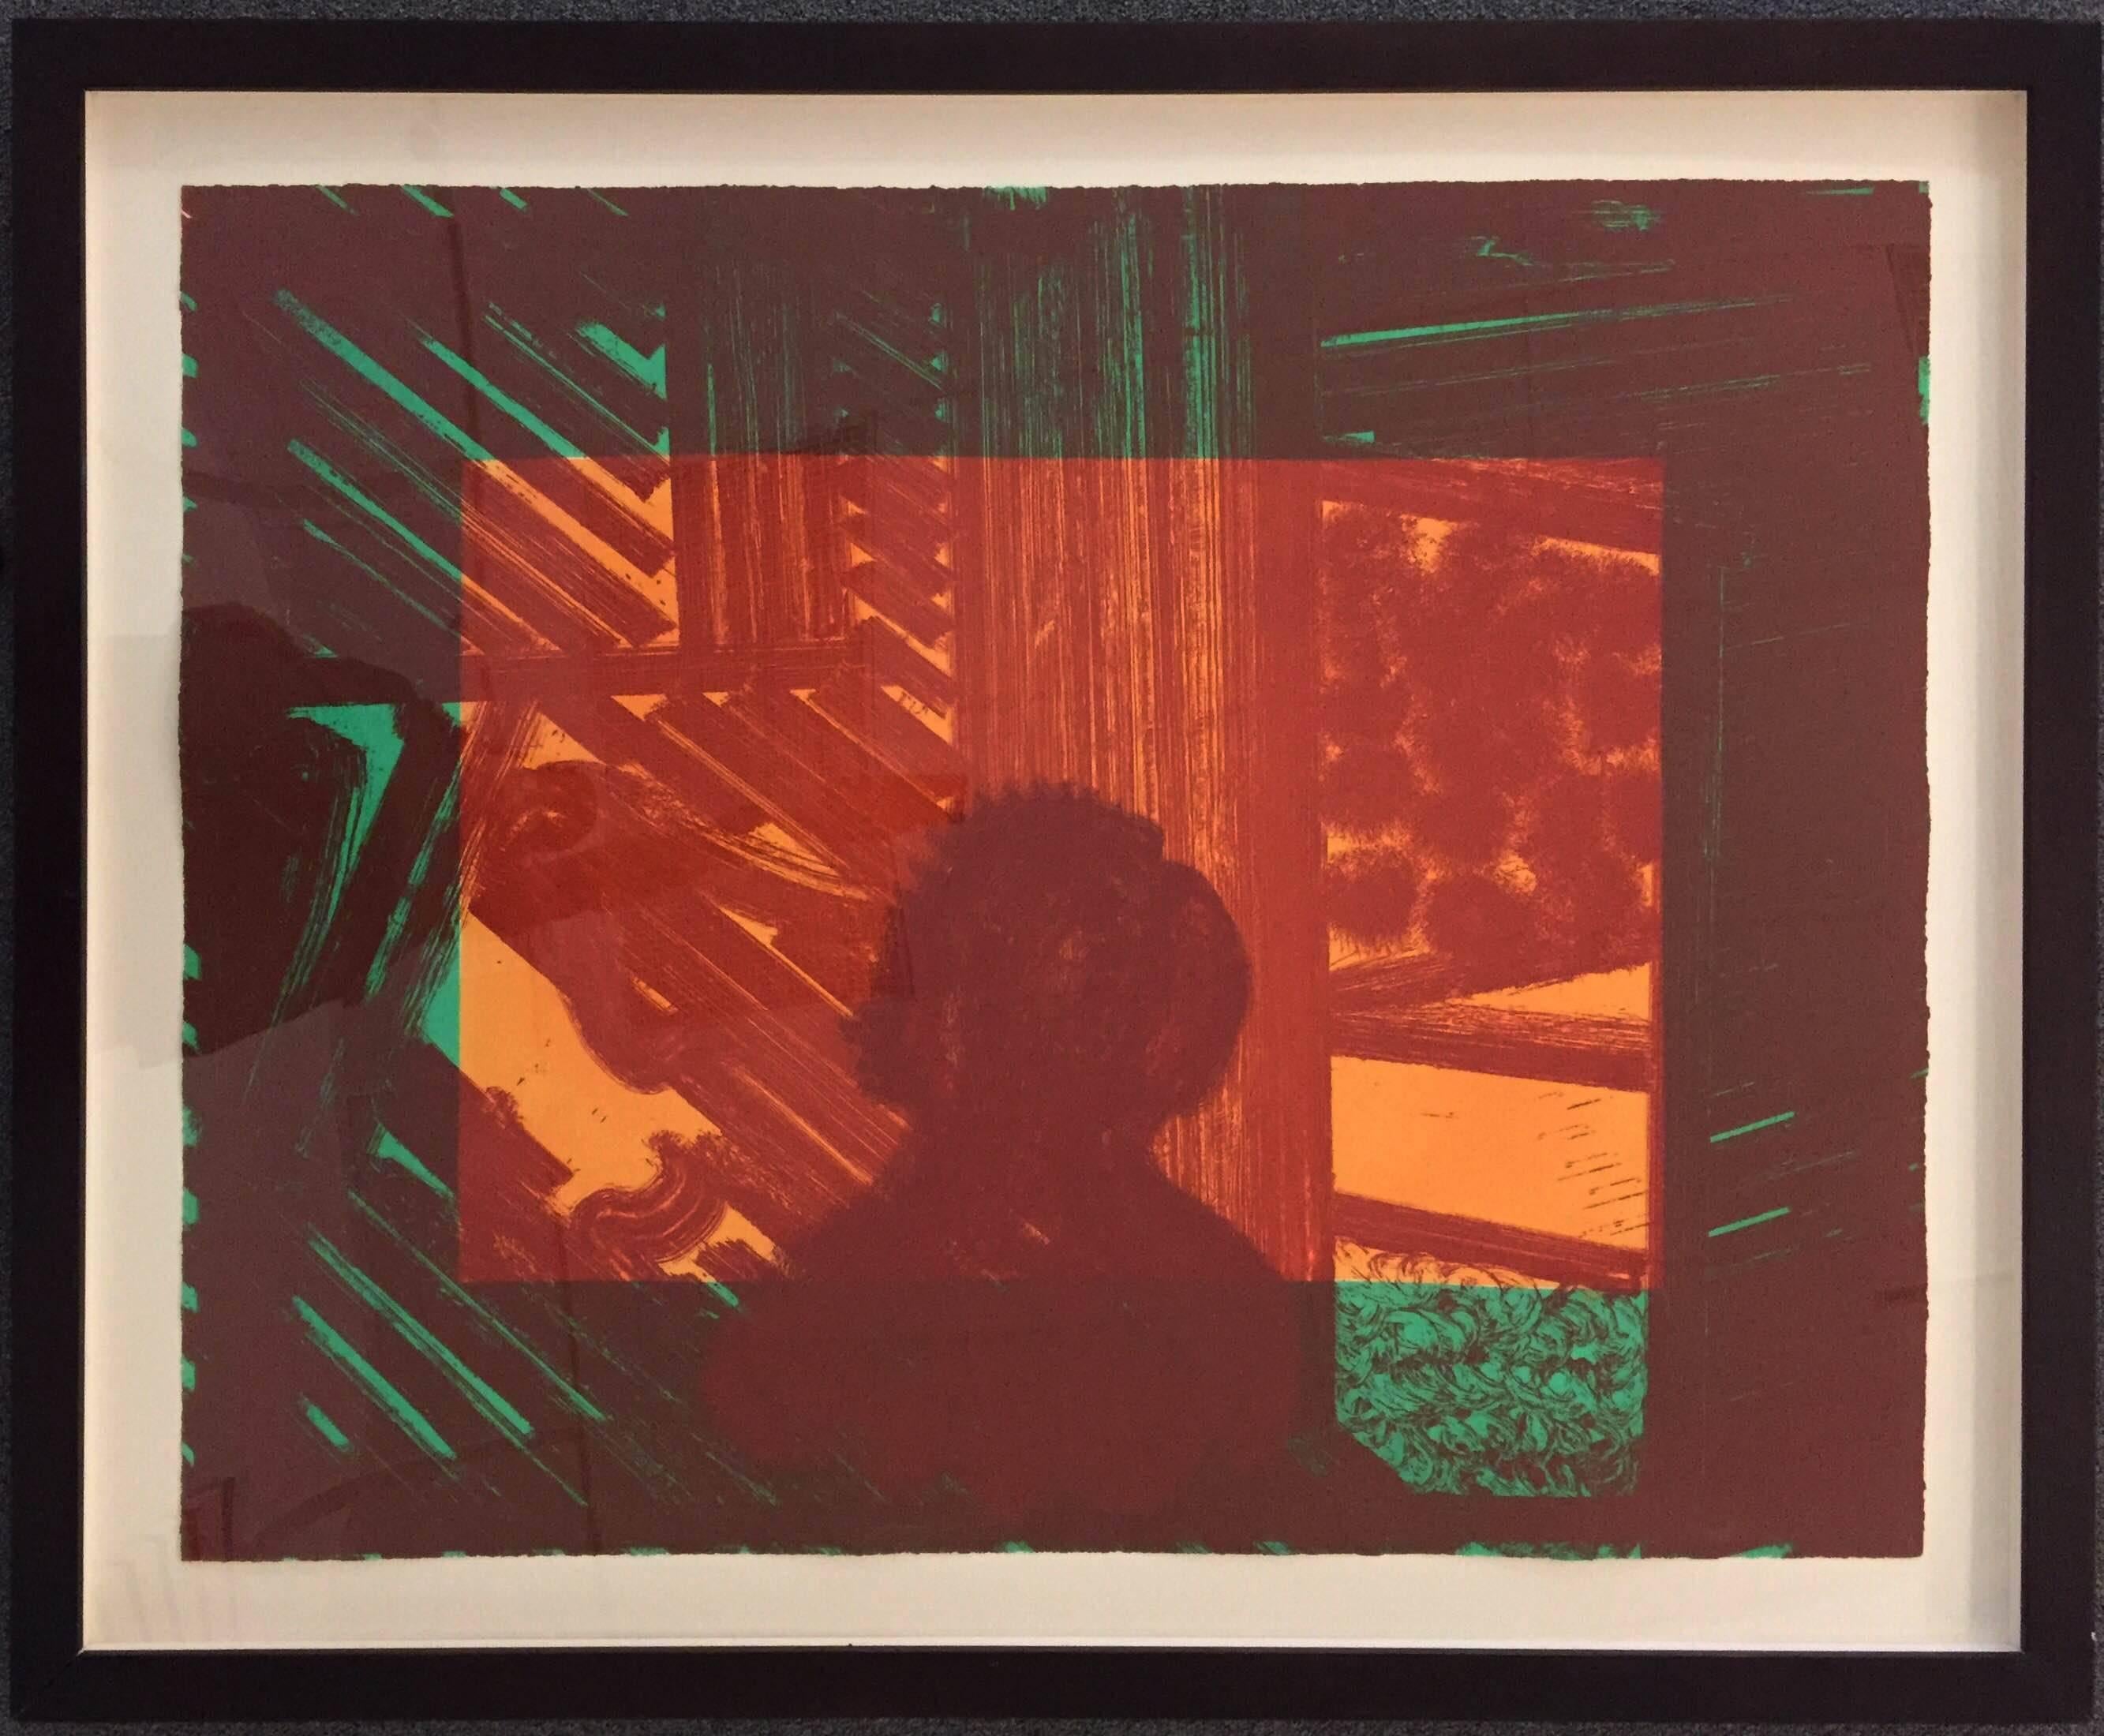 Artist and Model - Abstract Expressionist Print by Howard Hodgkin